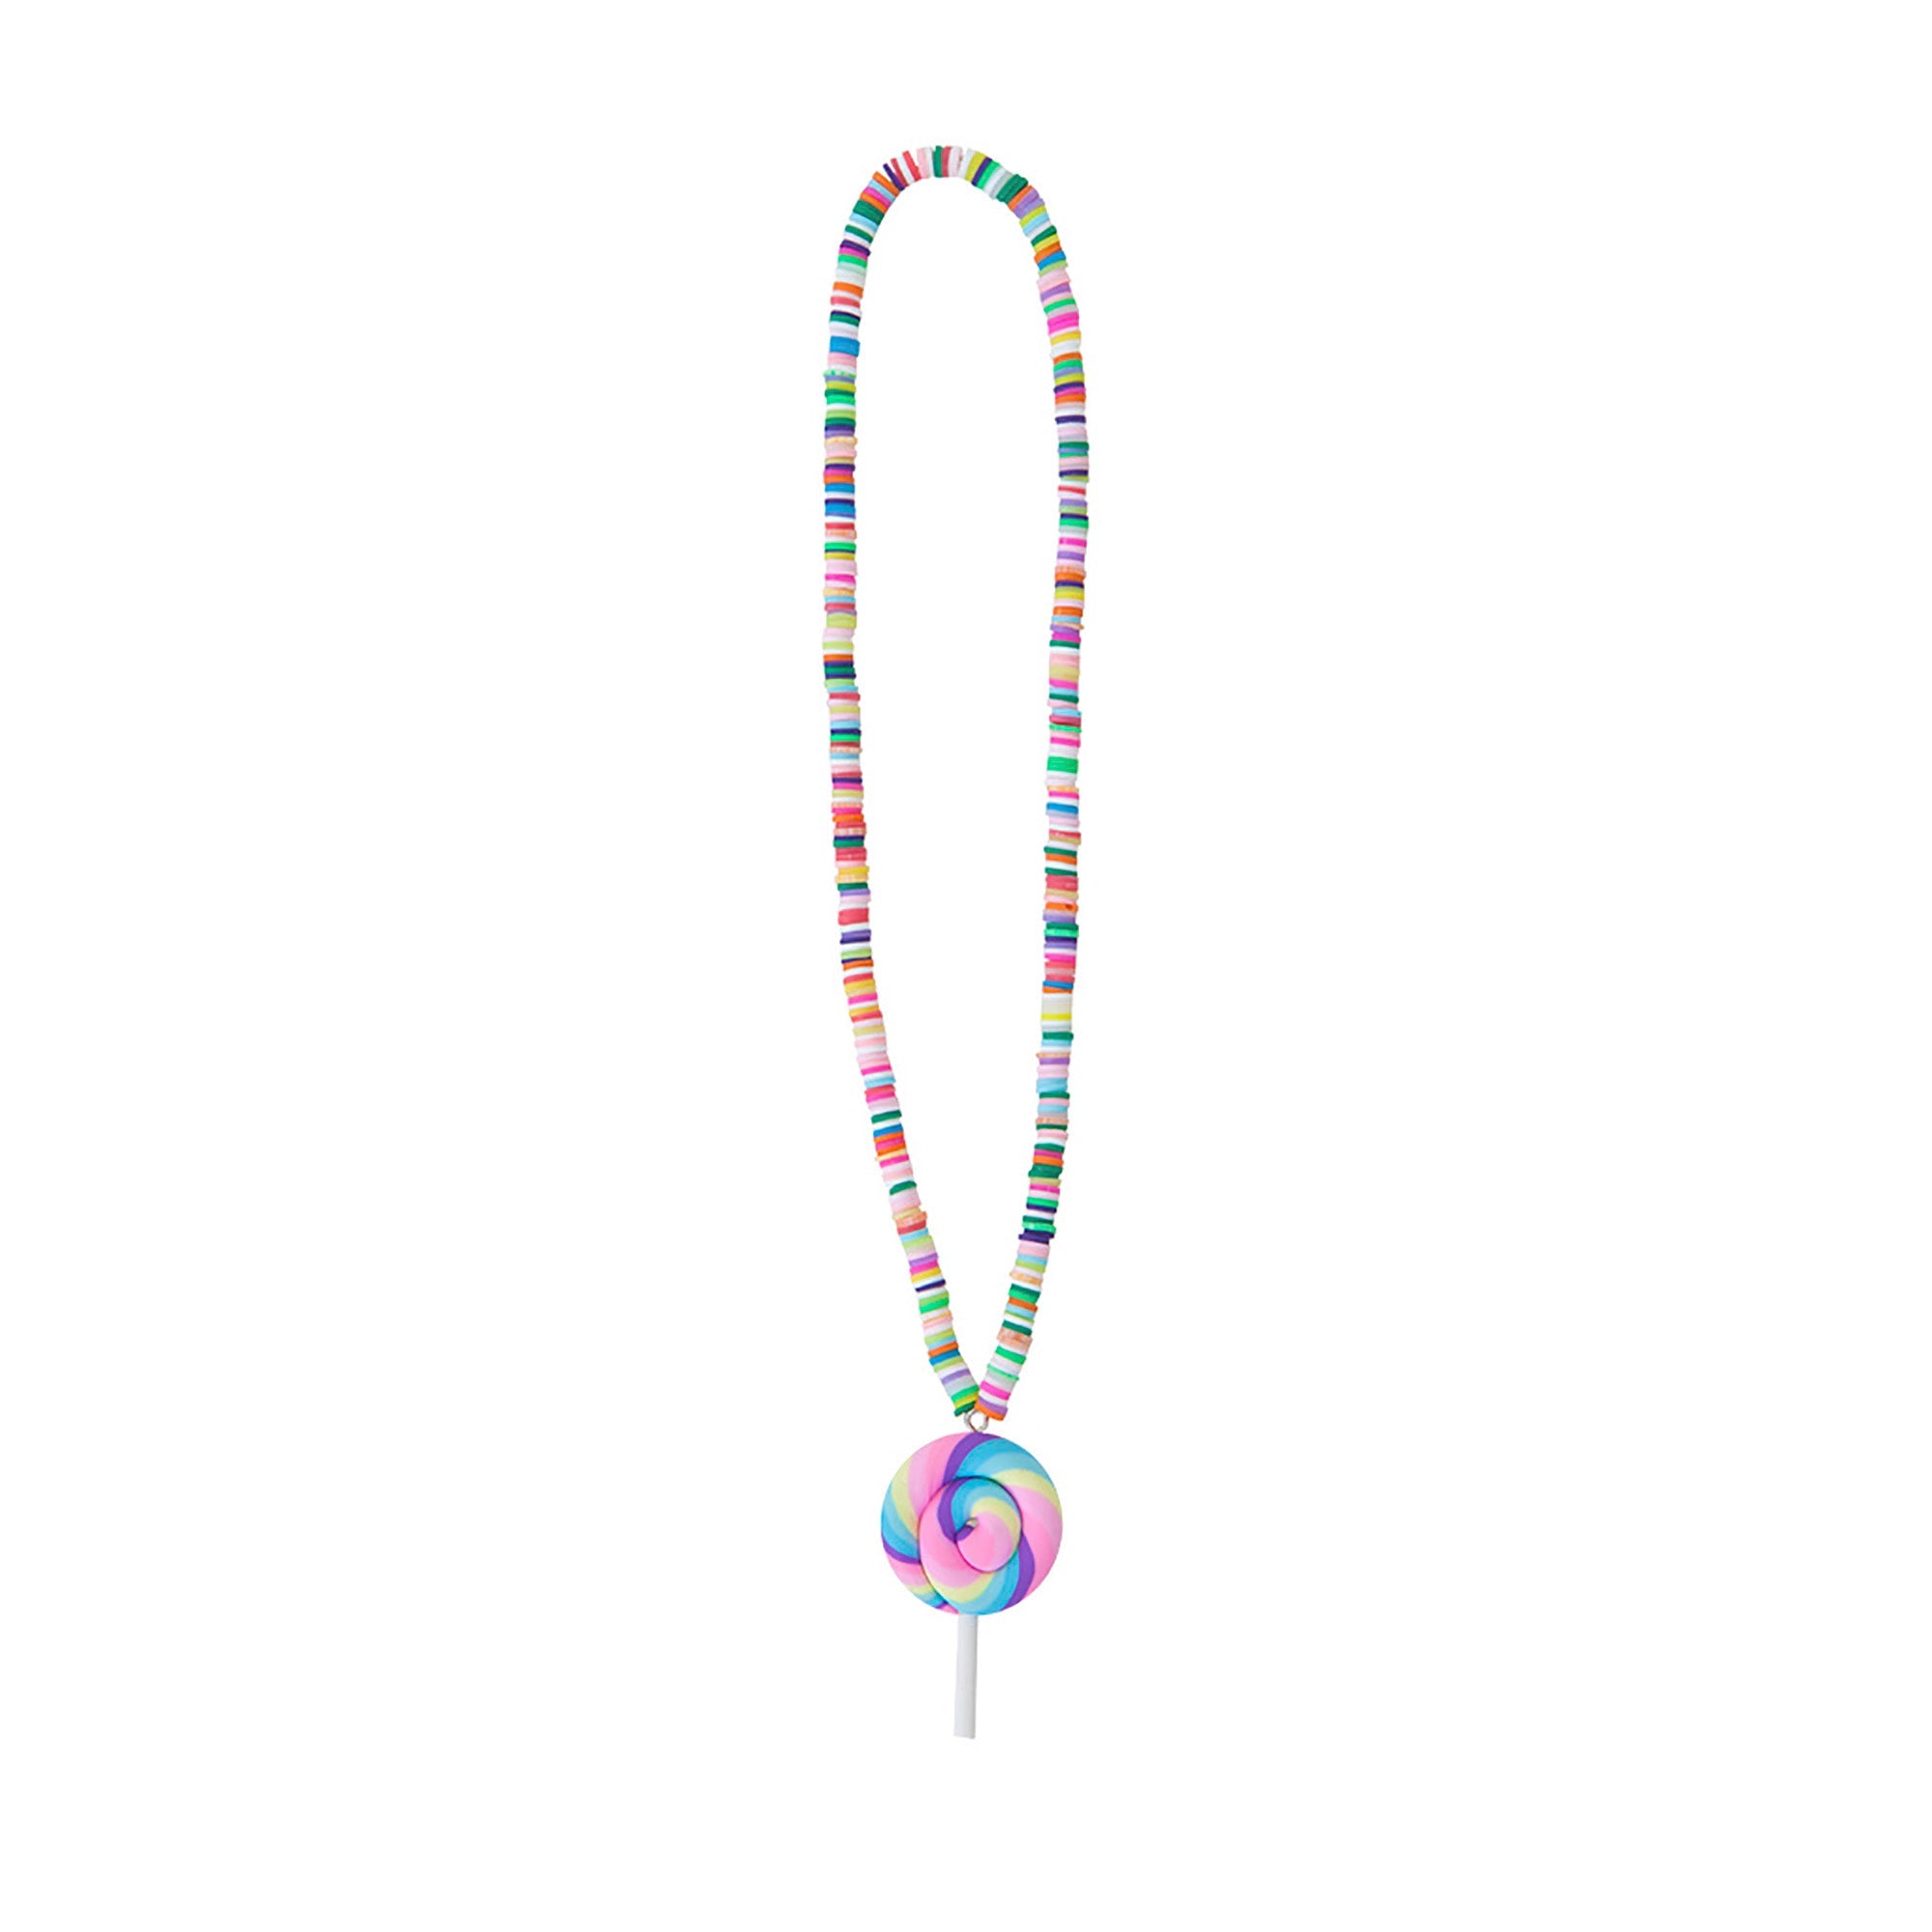 Kid's Jewelry Beaded Necklace with Charm